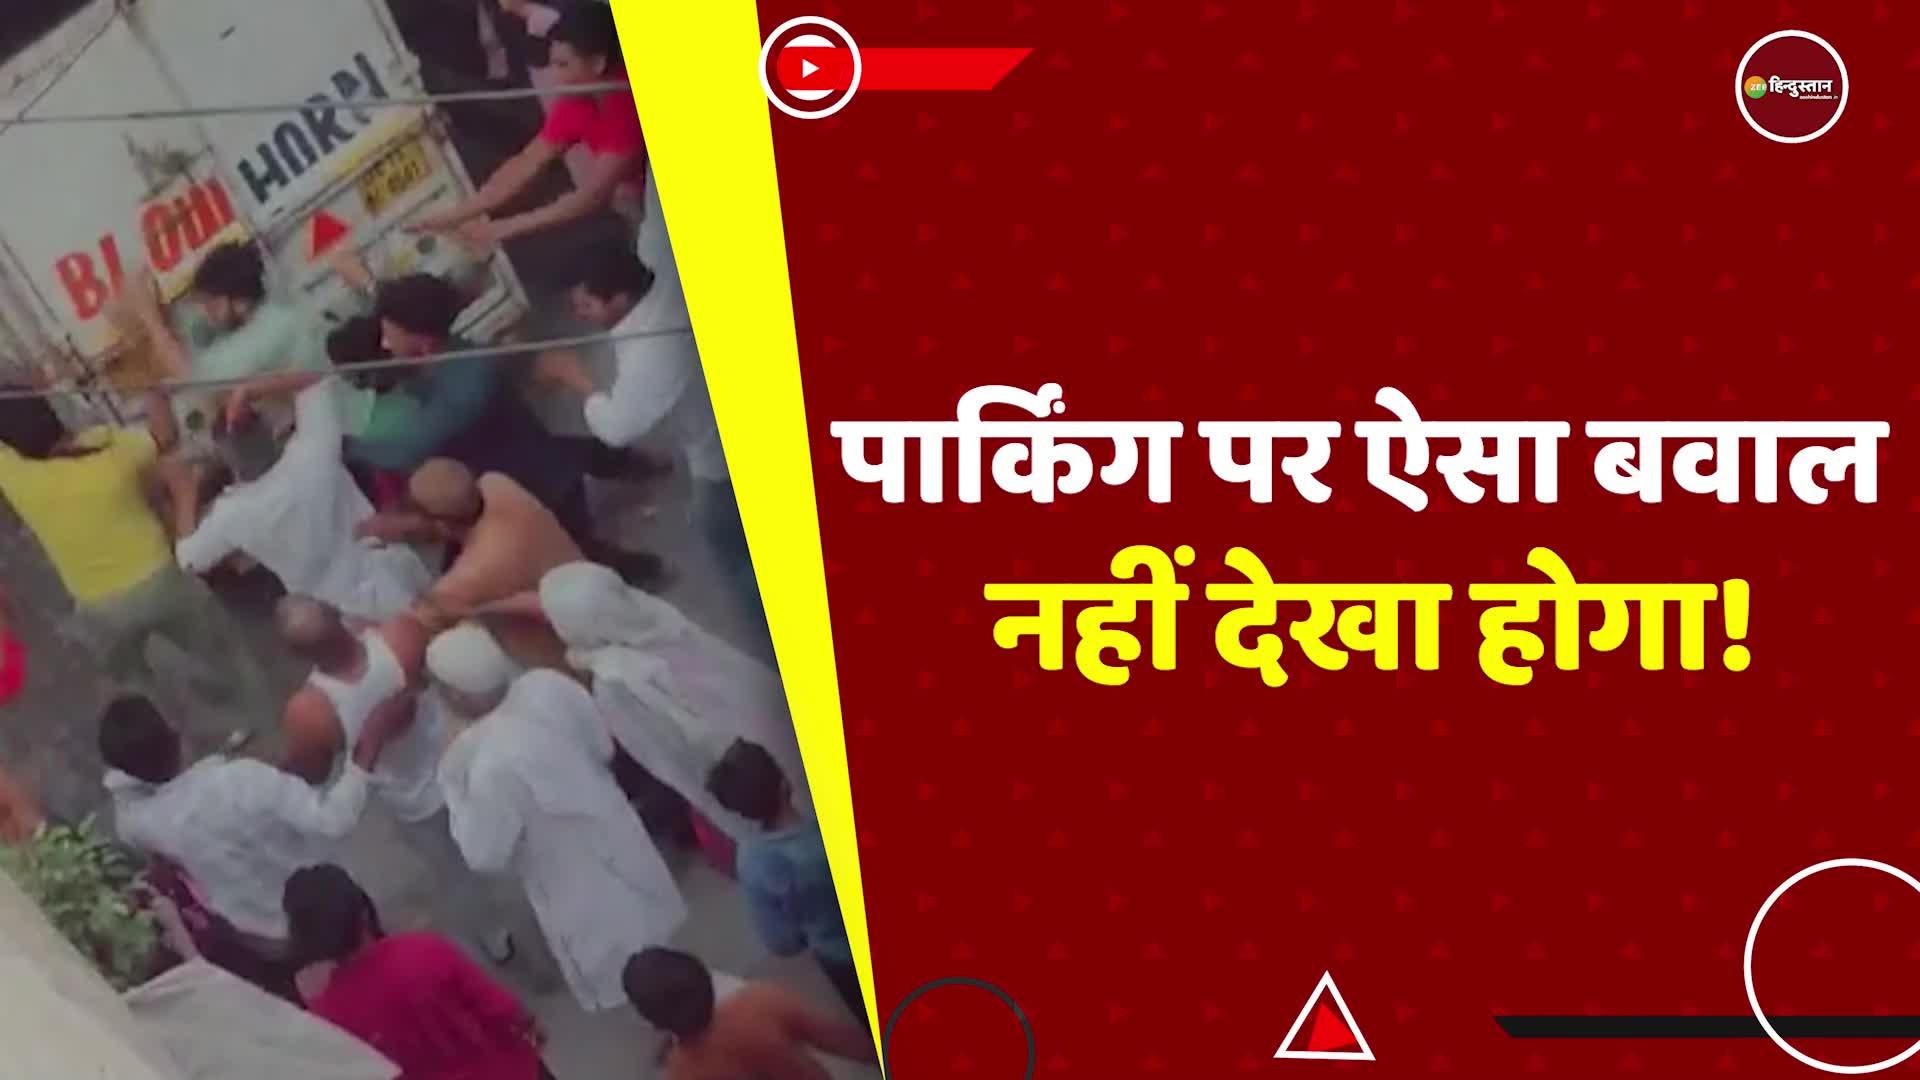 Viral Video Of Fight Between People Over Parking Issue In Ghaziabad Loni Border Area गाजियाबाद